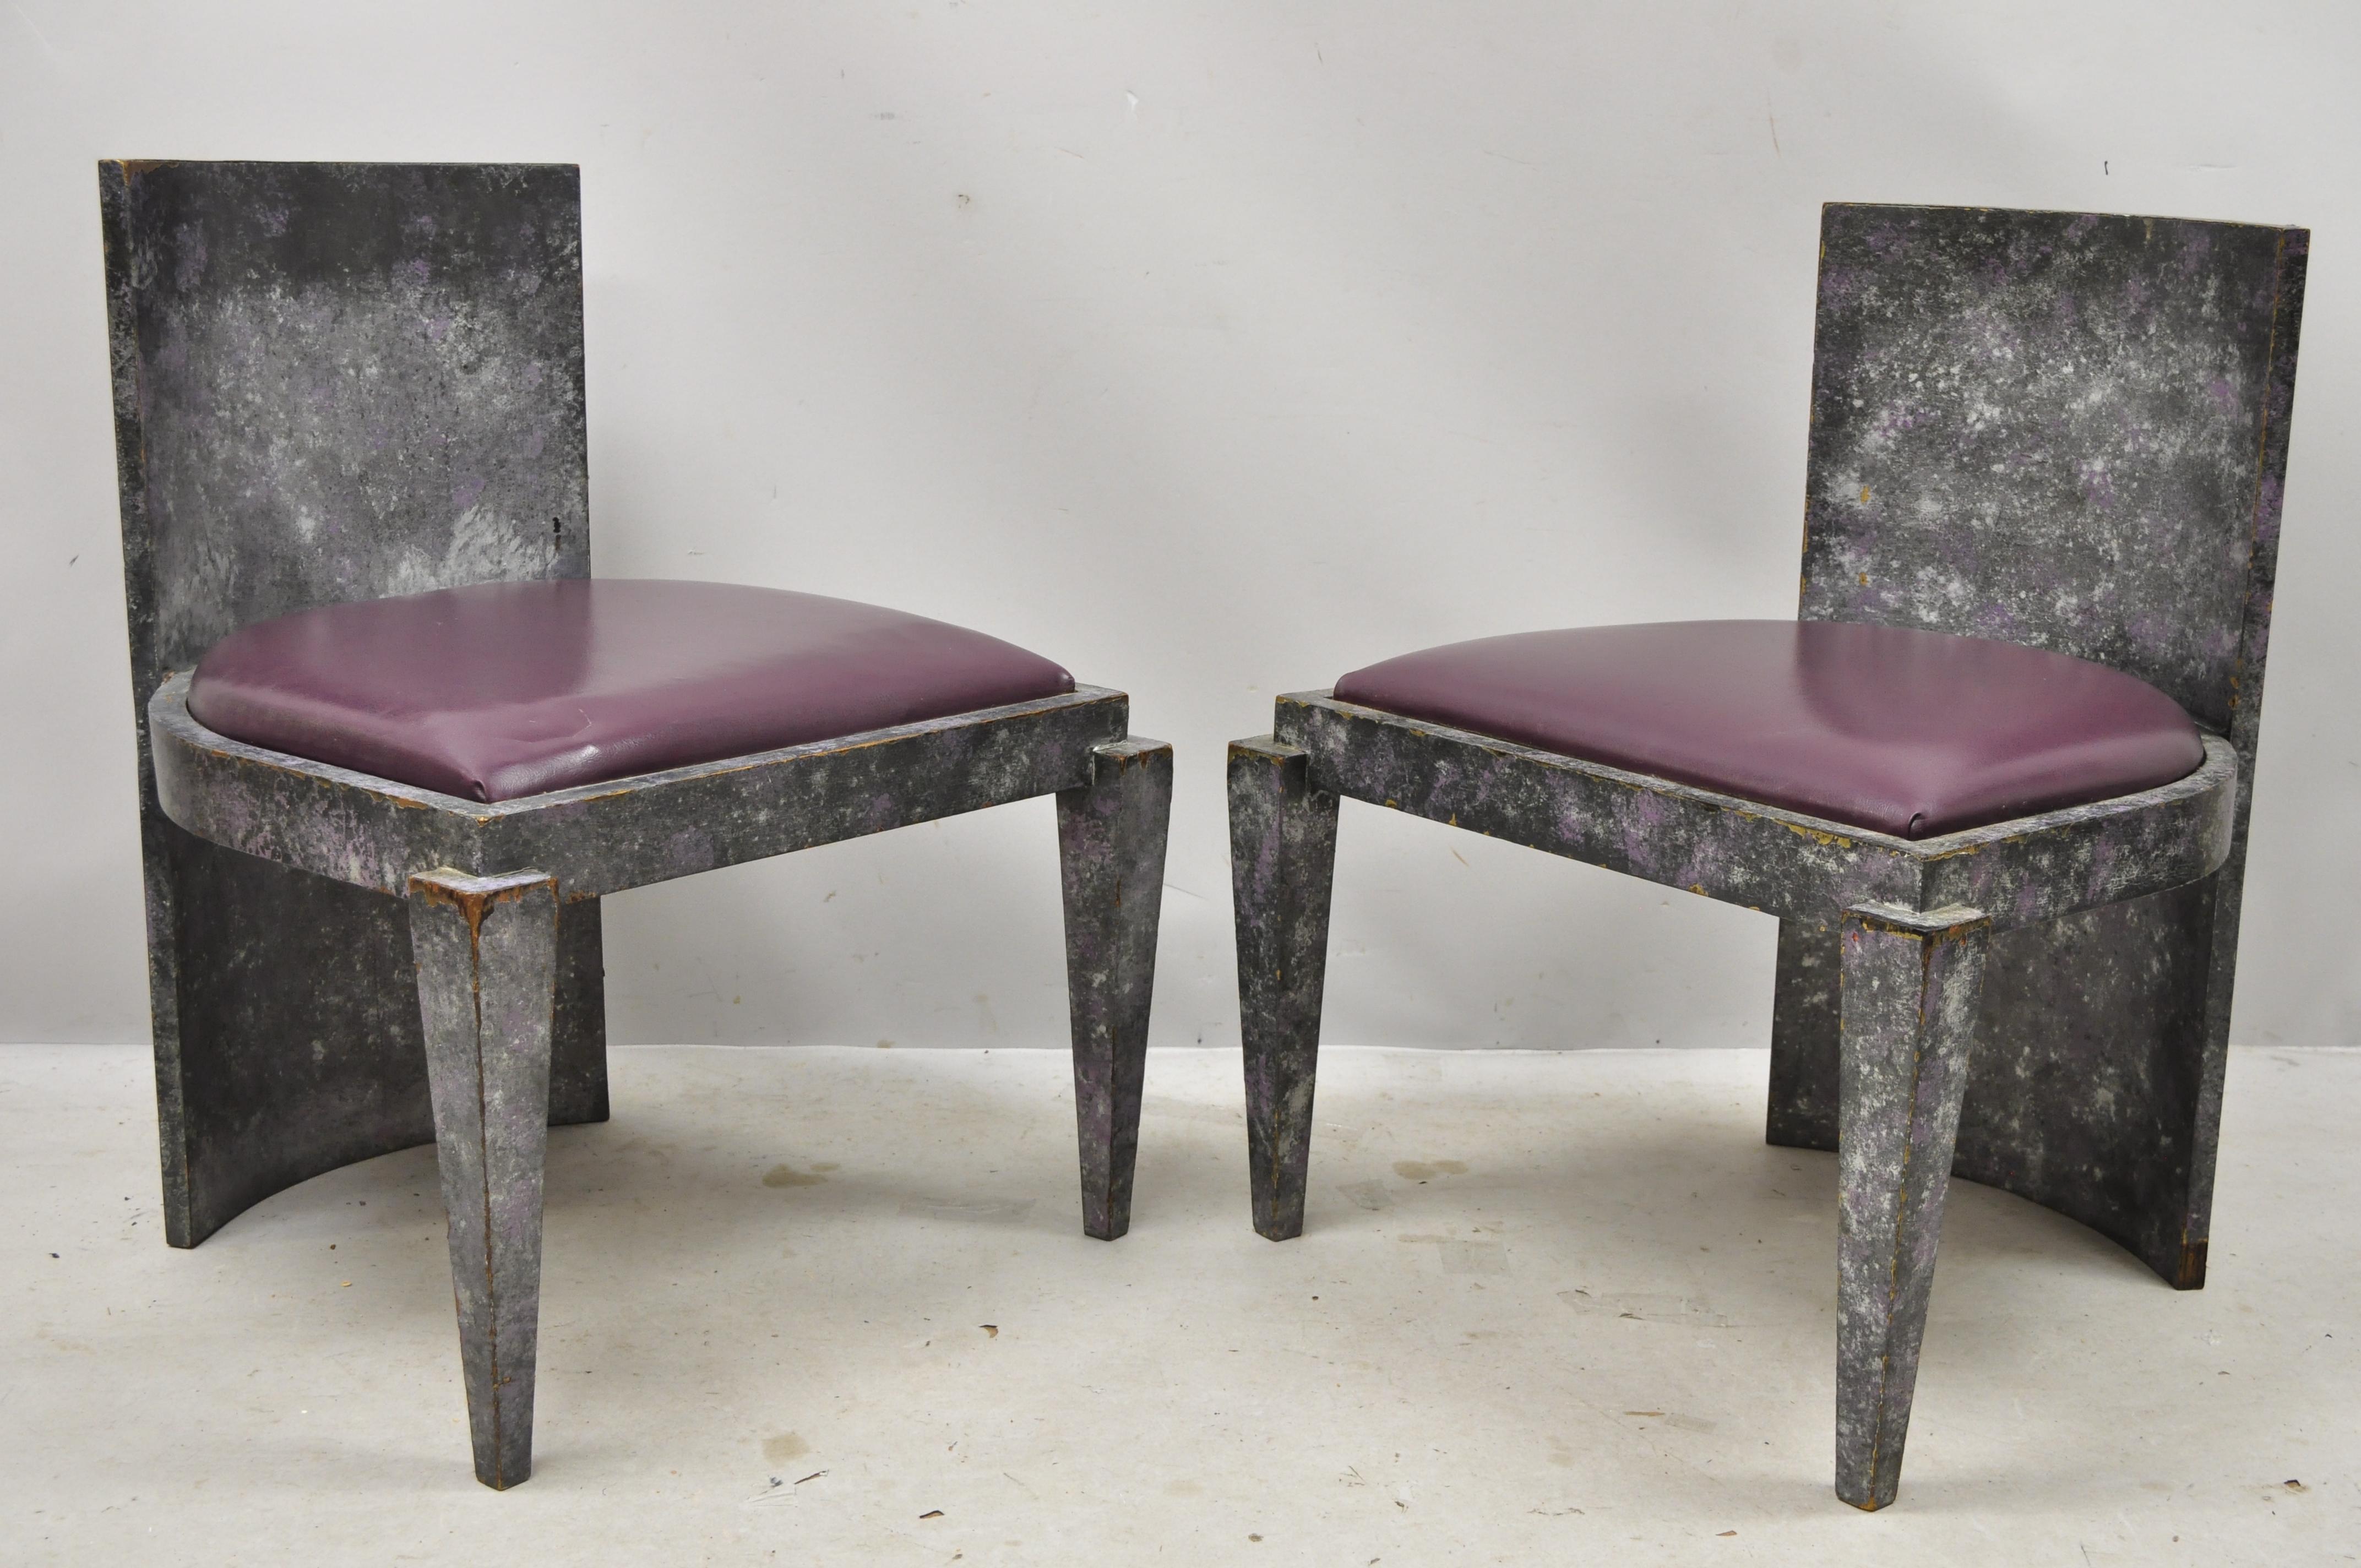 Vintage Mid-Century Modern Art Deco purple and gray lounge club game chairs - a pair. Item features faux concrete painted finish, curved backs, purple vinyl seats, tapered legs, great style and form, circa mid-late 20th century. Measurements: 30